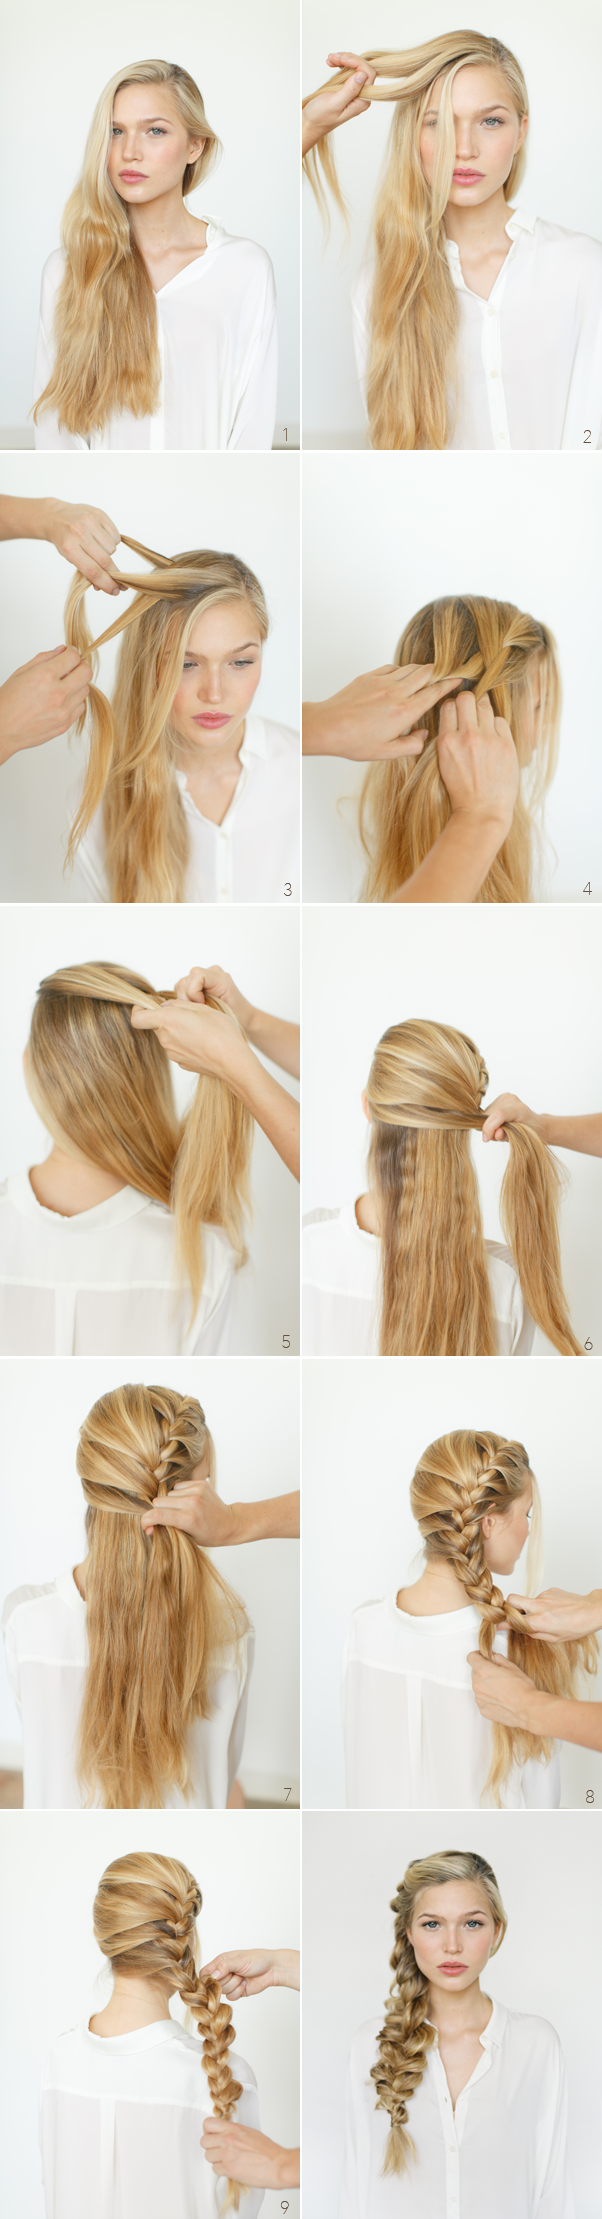 17 Romantic Hairstyle Ideas and Tutorials  (2)